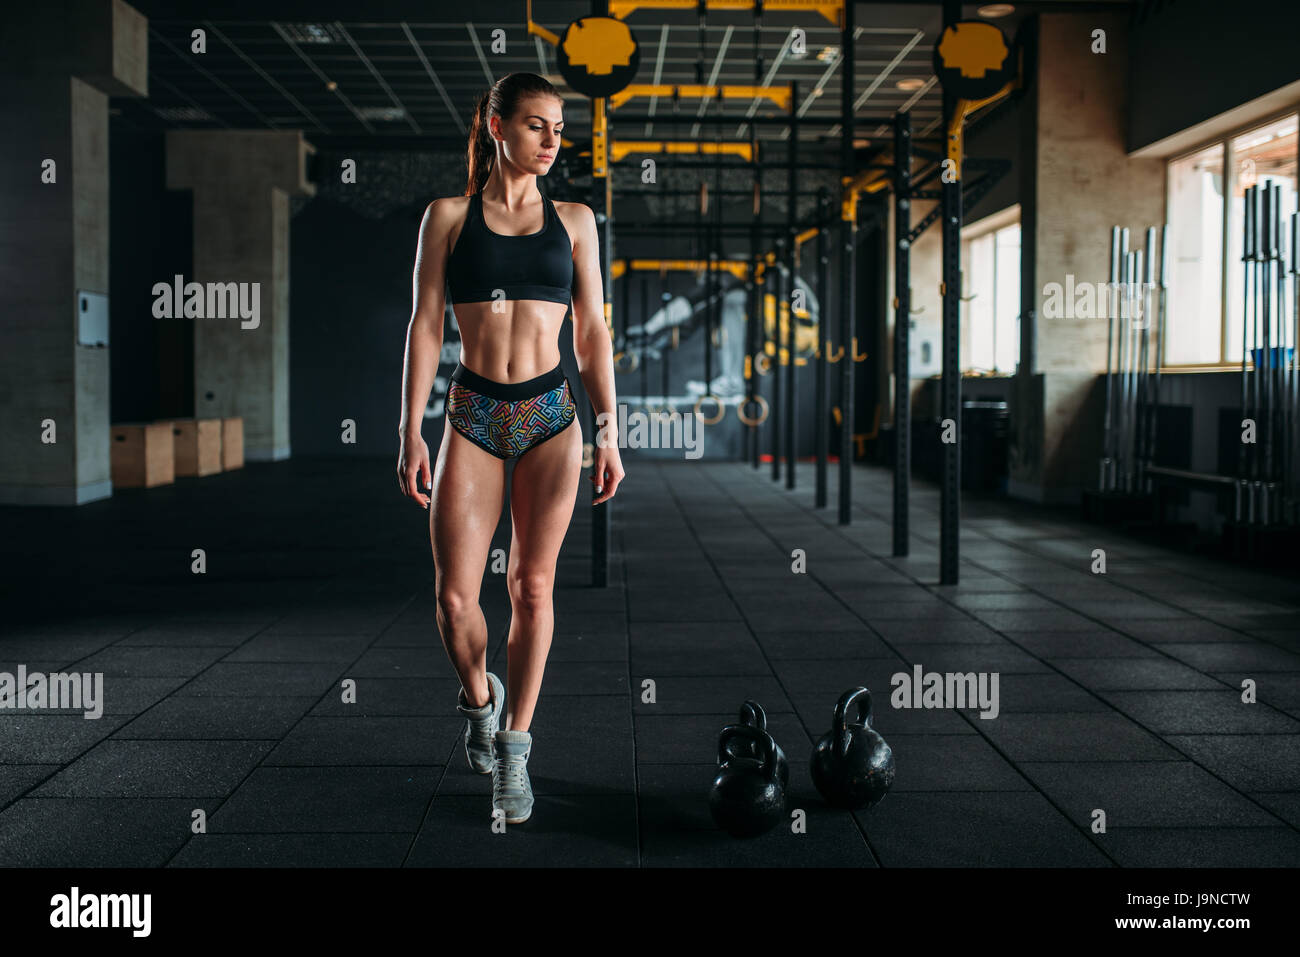 https://c8.alamy.com/comp/J9NCTW/attractive-female-athlete-with-muscular-body-posing-in-gym-slim-woman-J9NCTW.jpg